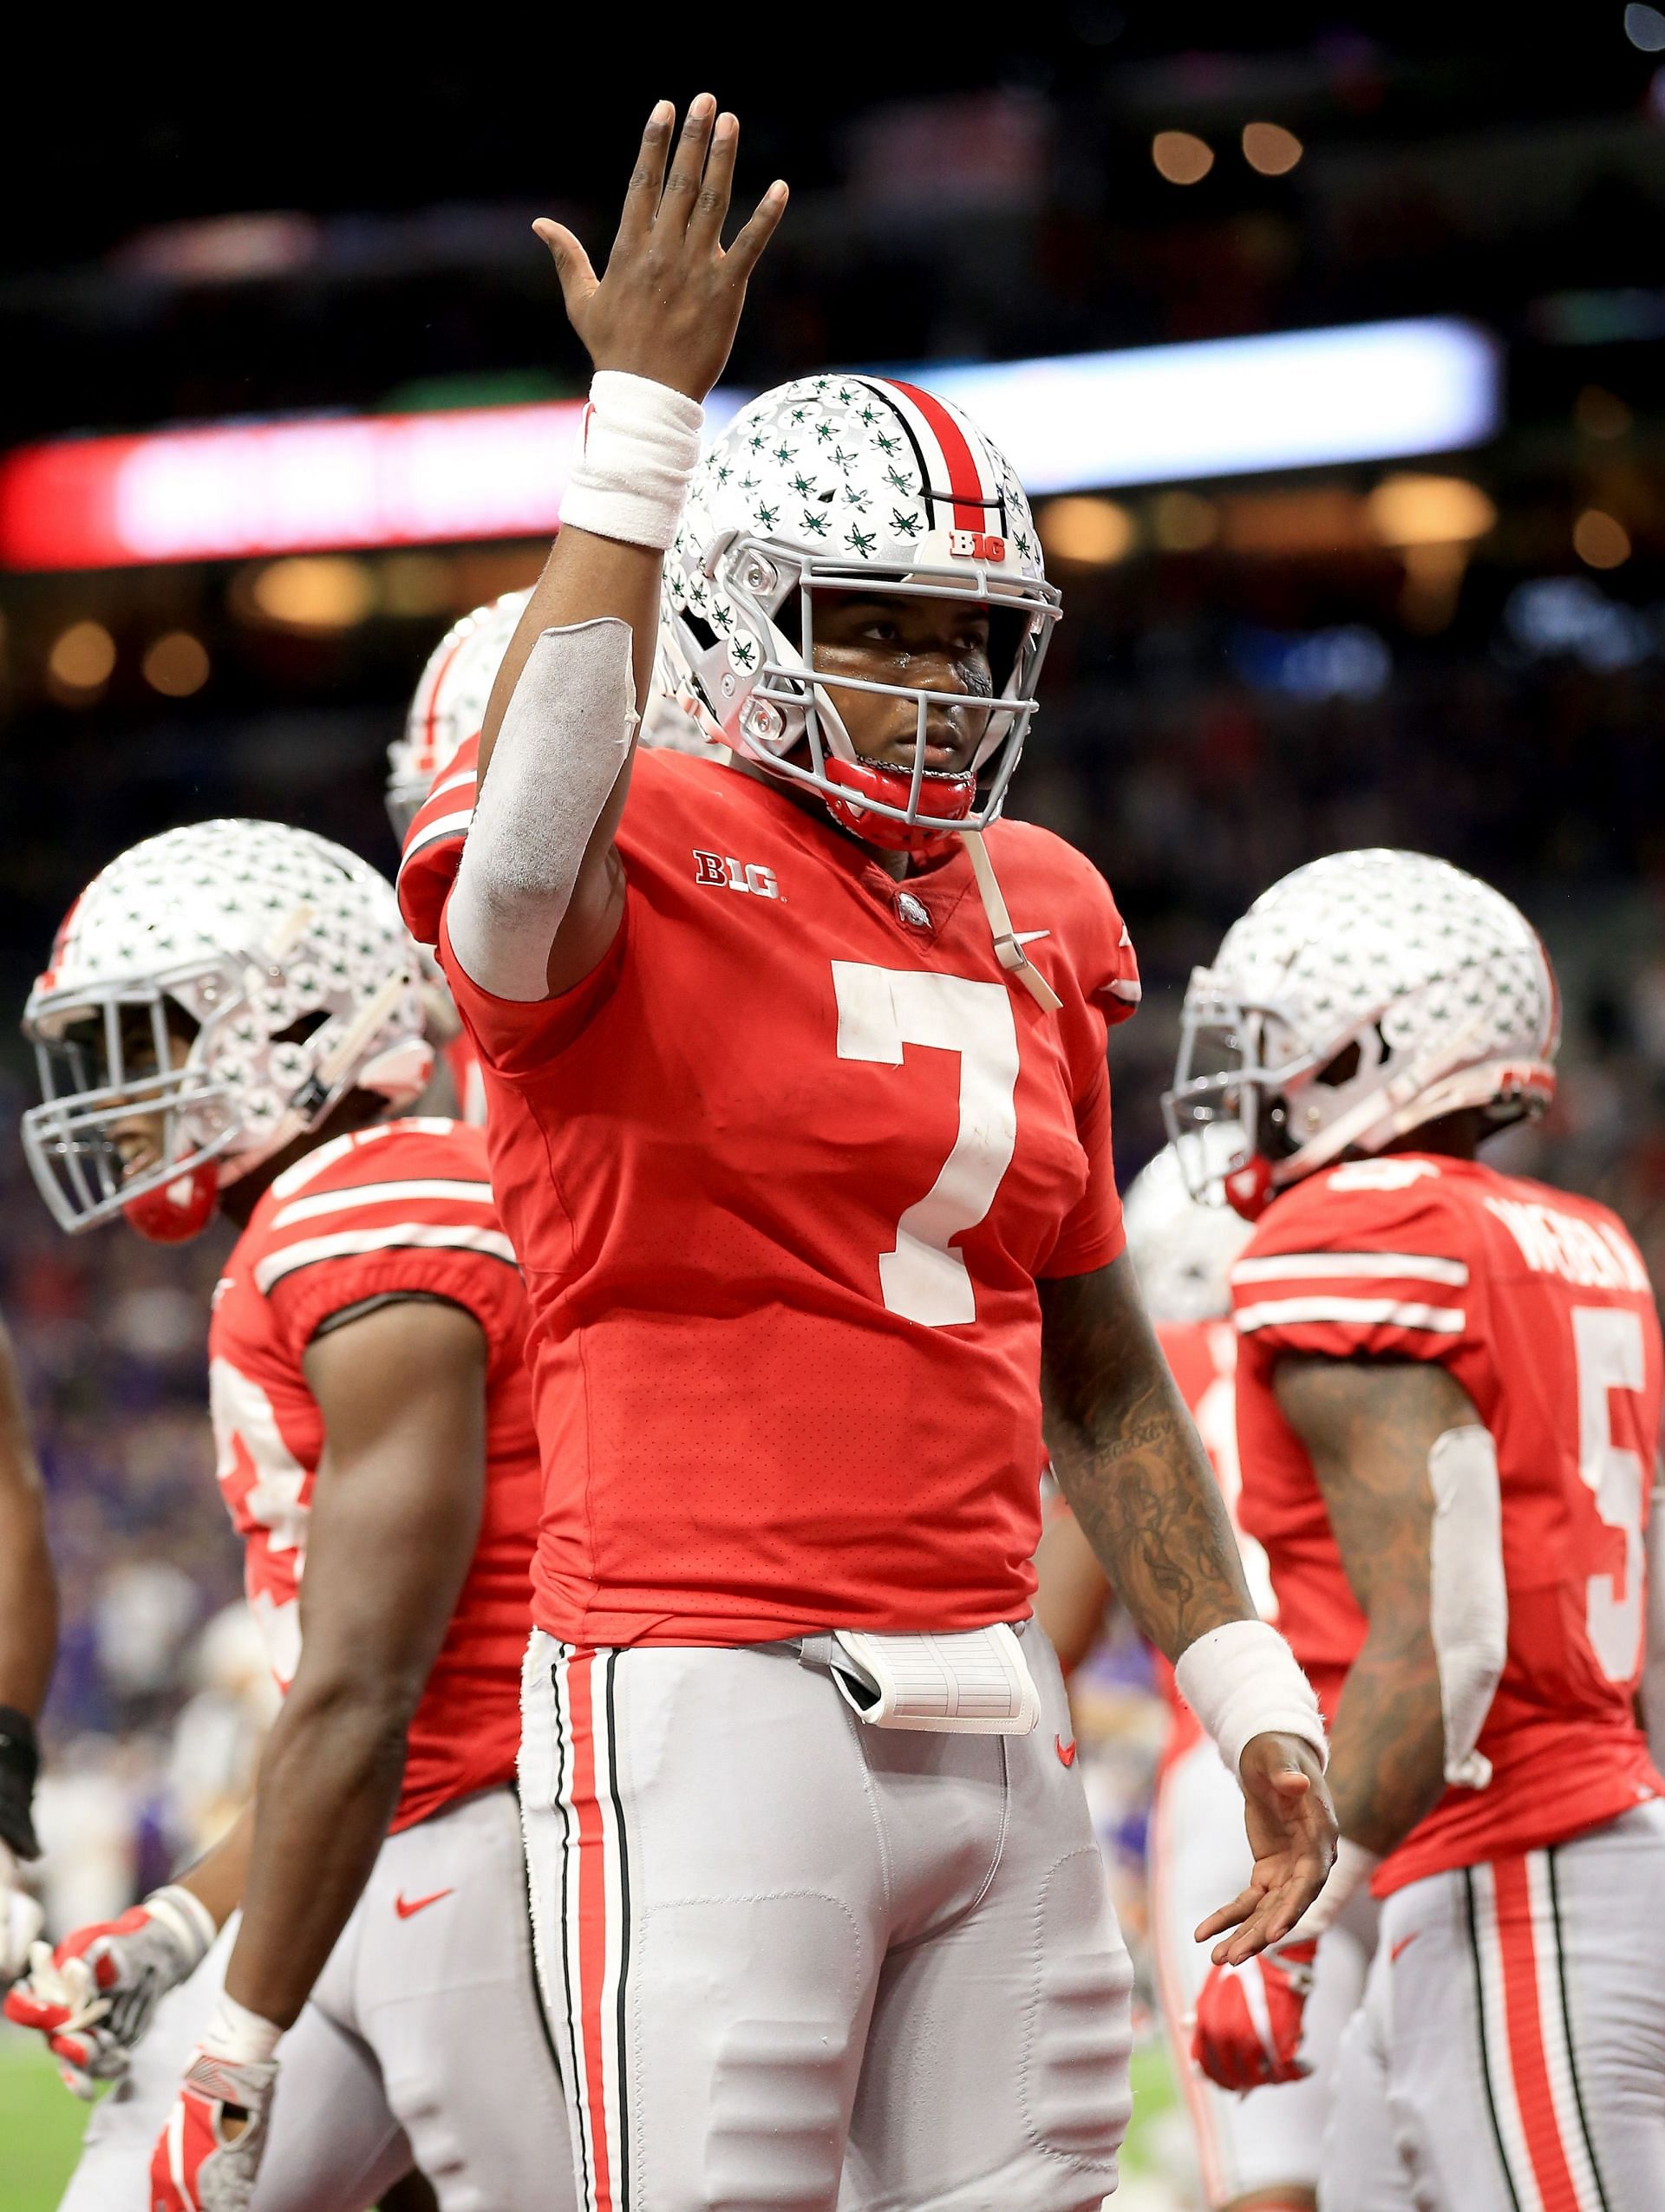 Dwayne Haskins while with the Ohio State Buckeyes